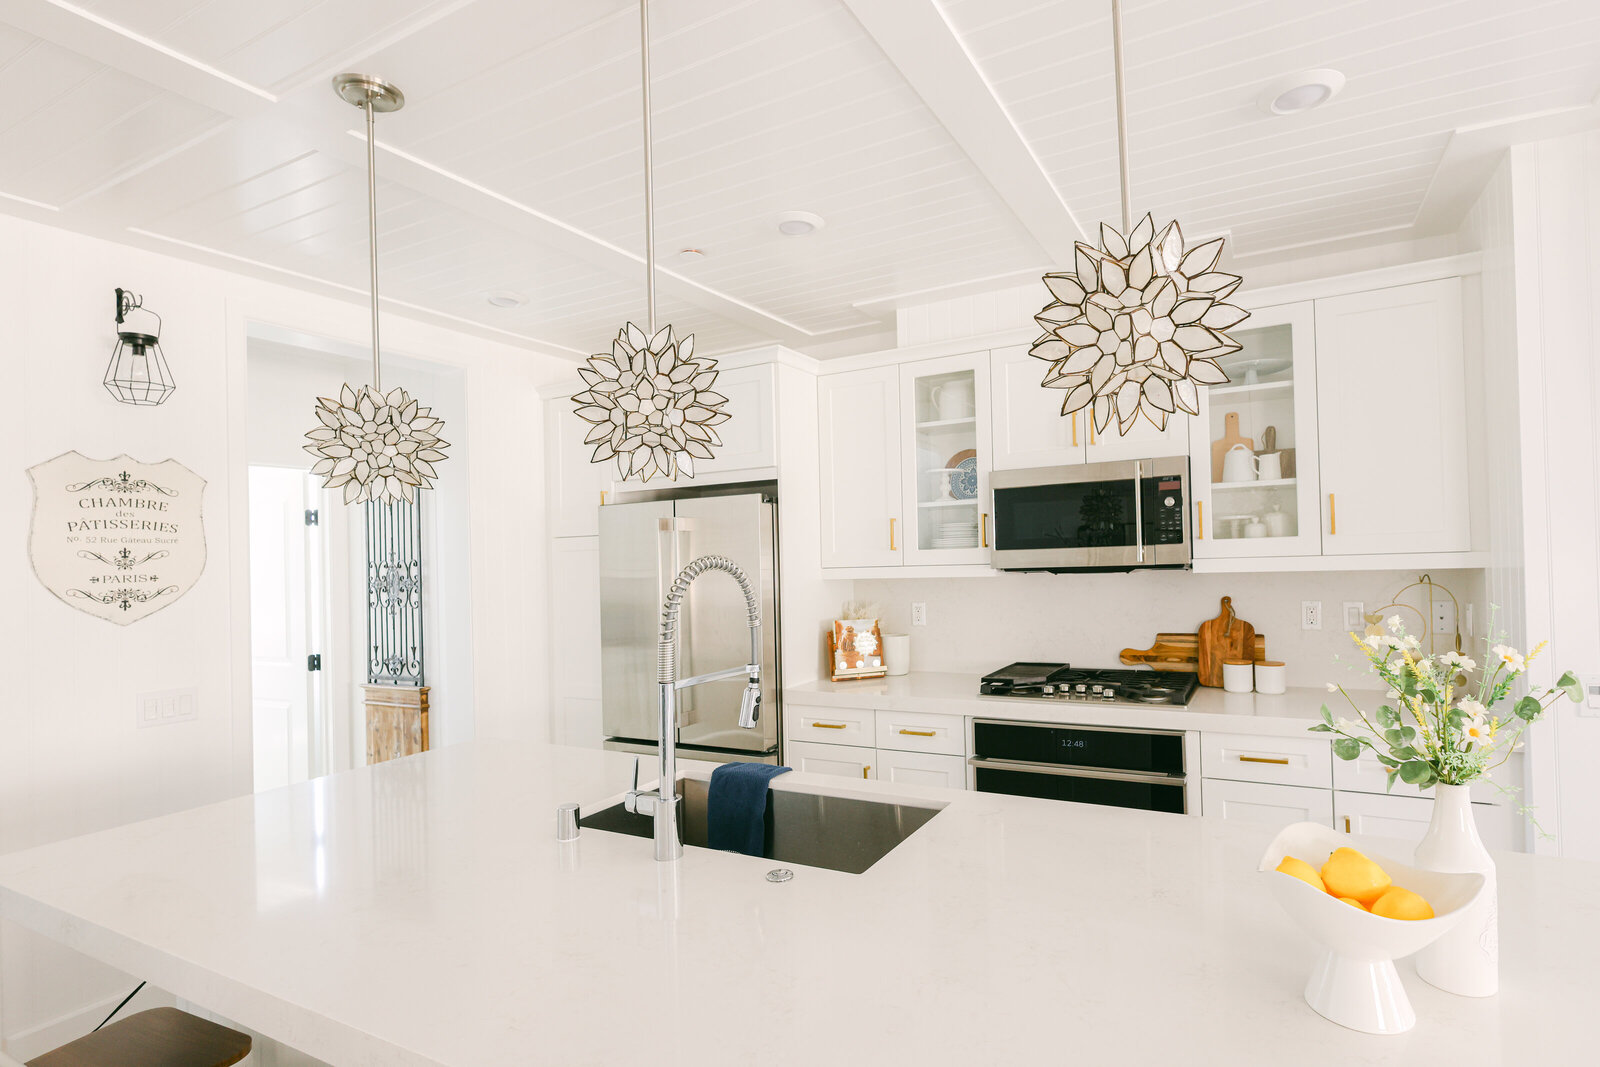 Light Airy kitchen in Mission beach orange county airbnb photographer carlsbad encintas